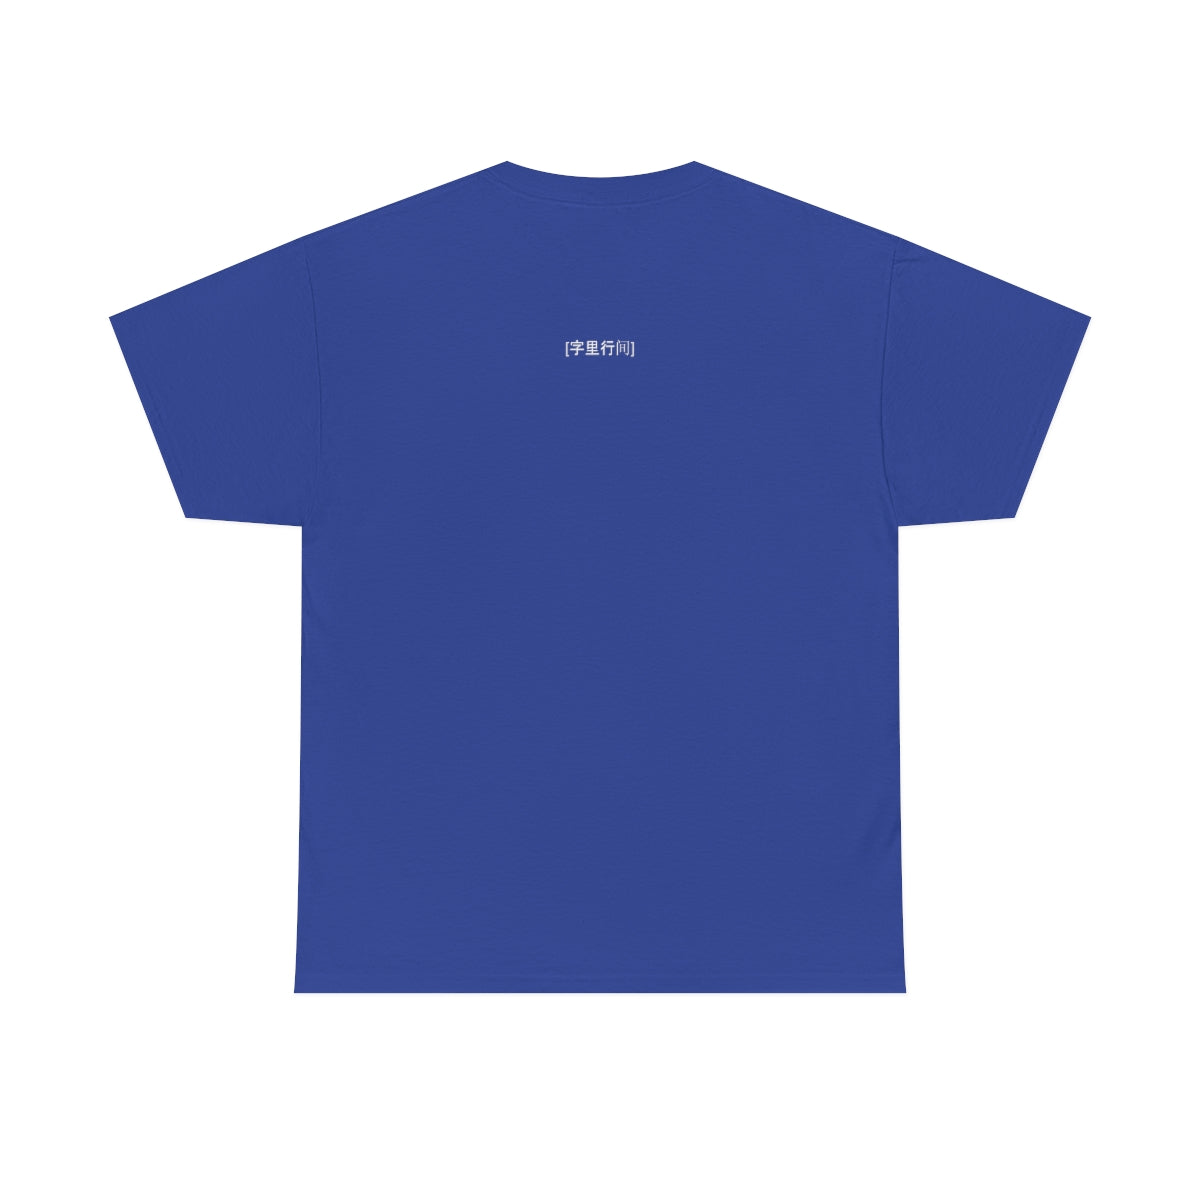 [N° d'inventaire] Between the Lines Heavy Cotton T-shirt